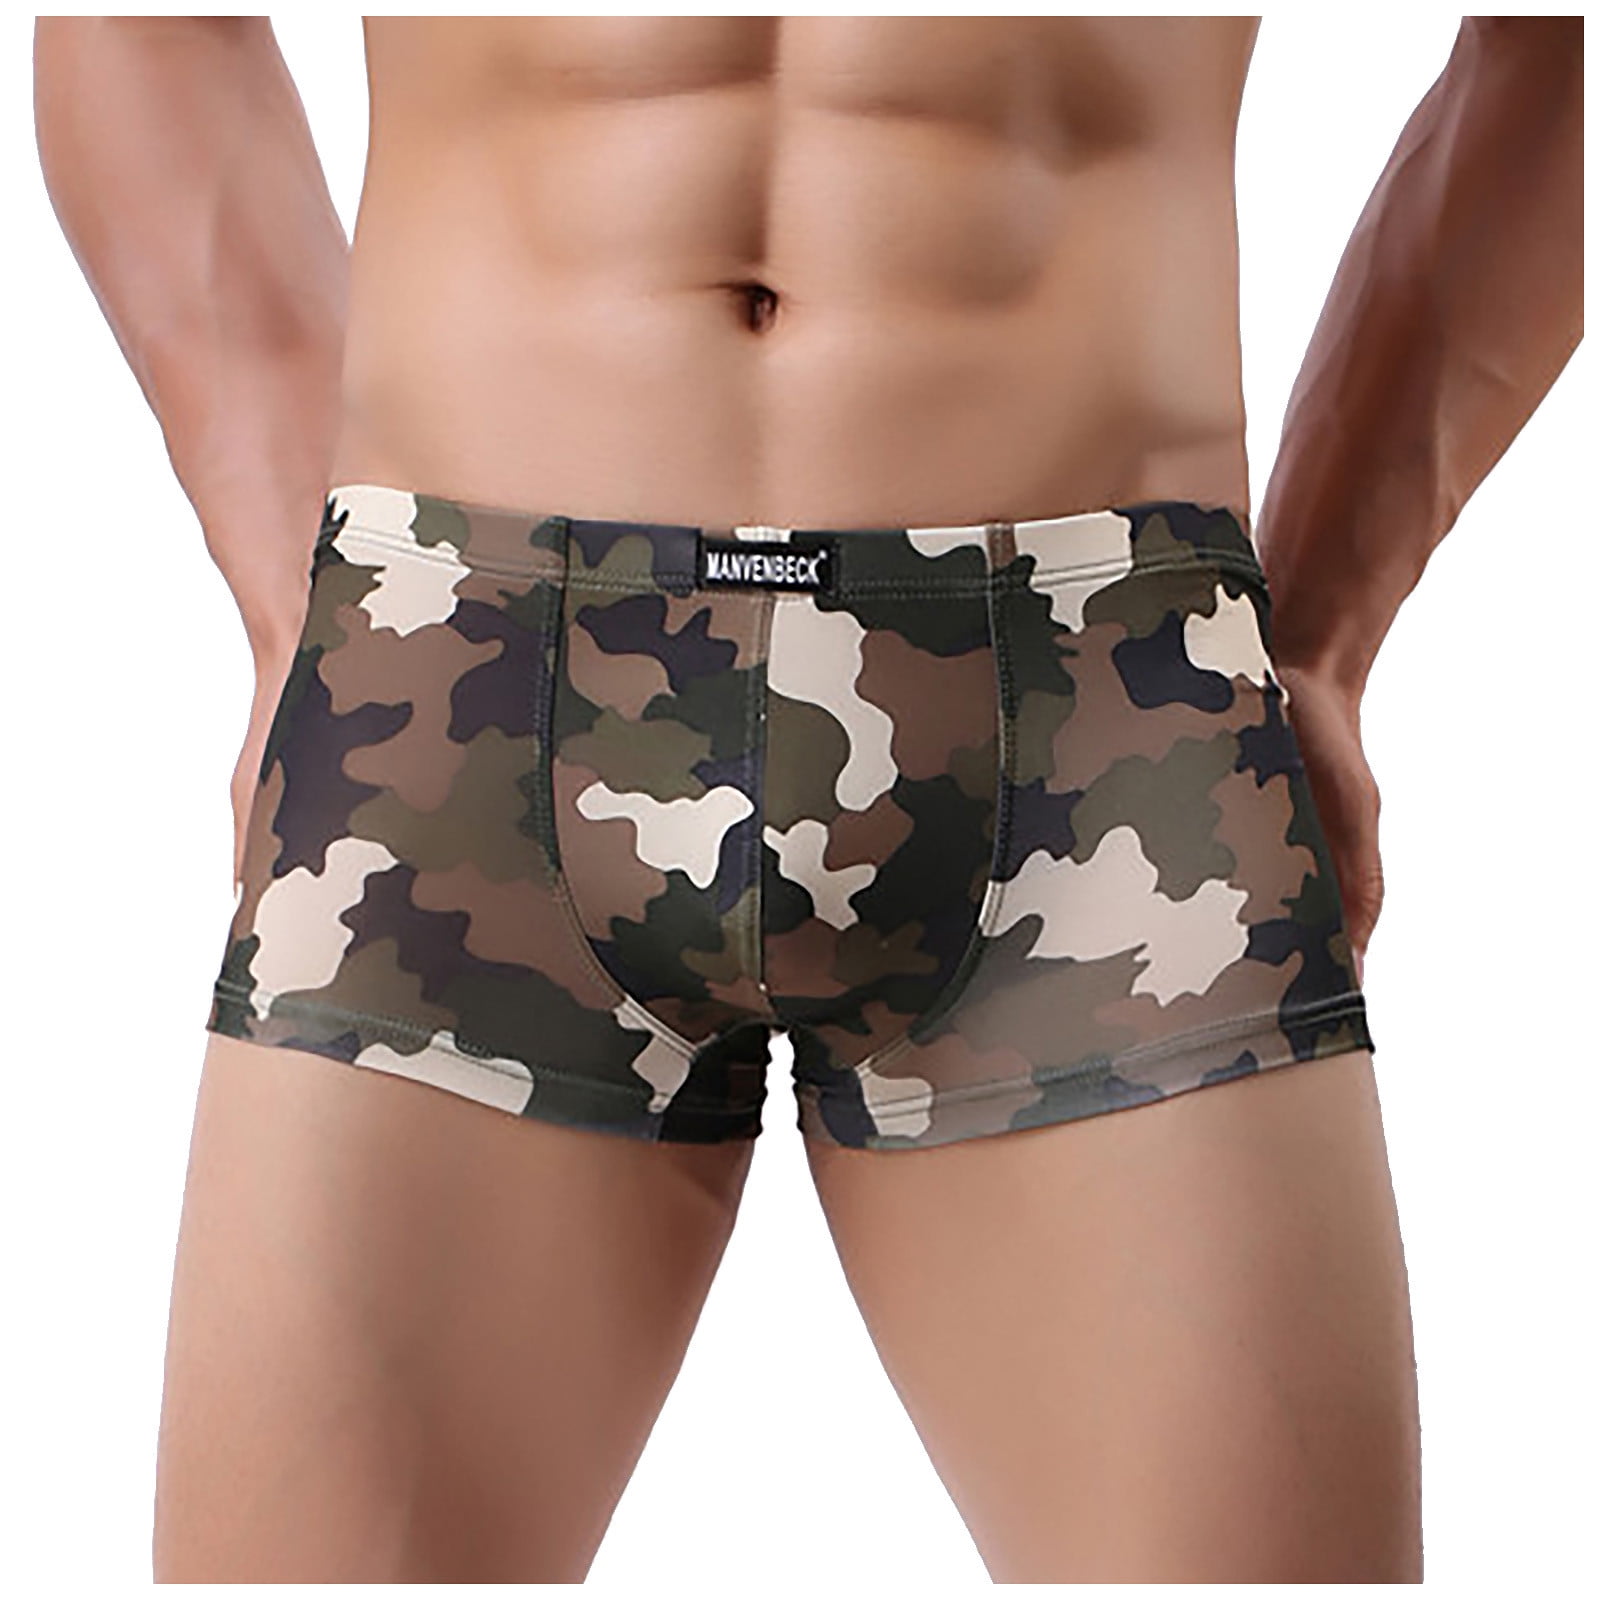 Cathalem Get Today Delivery Items Men Printed Breathable Camouflage Low  Waist Knitted T Bar Underwear Underpants Green Medium